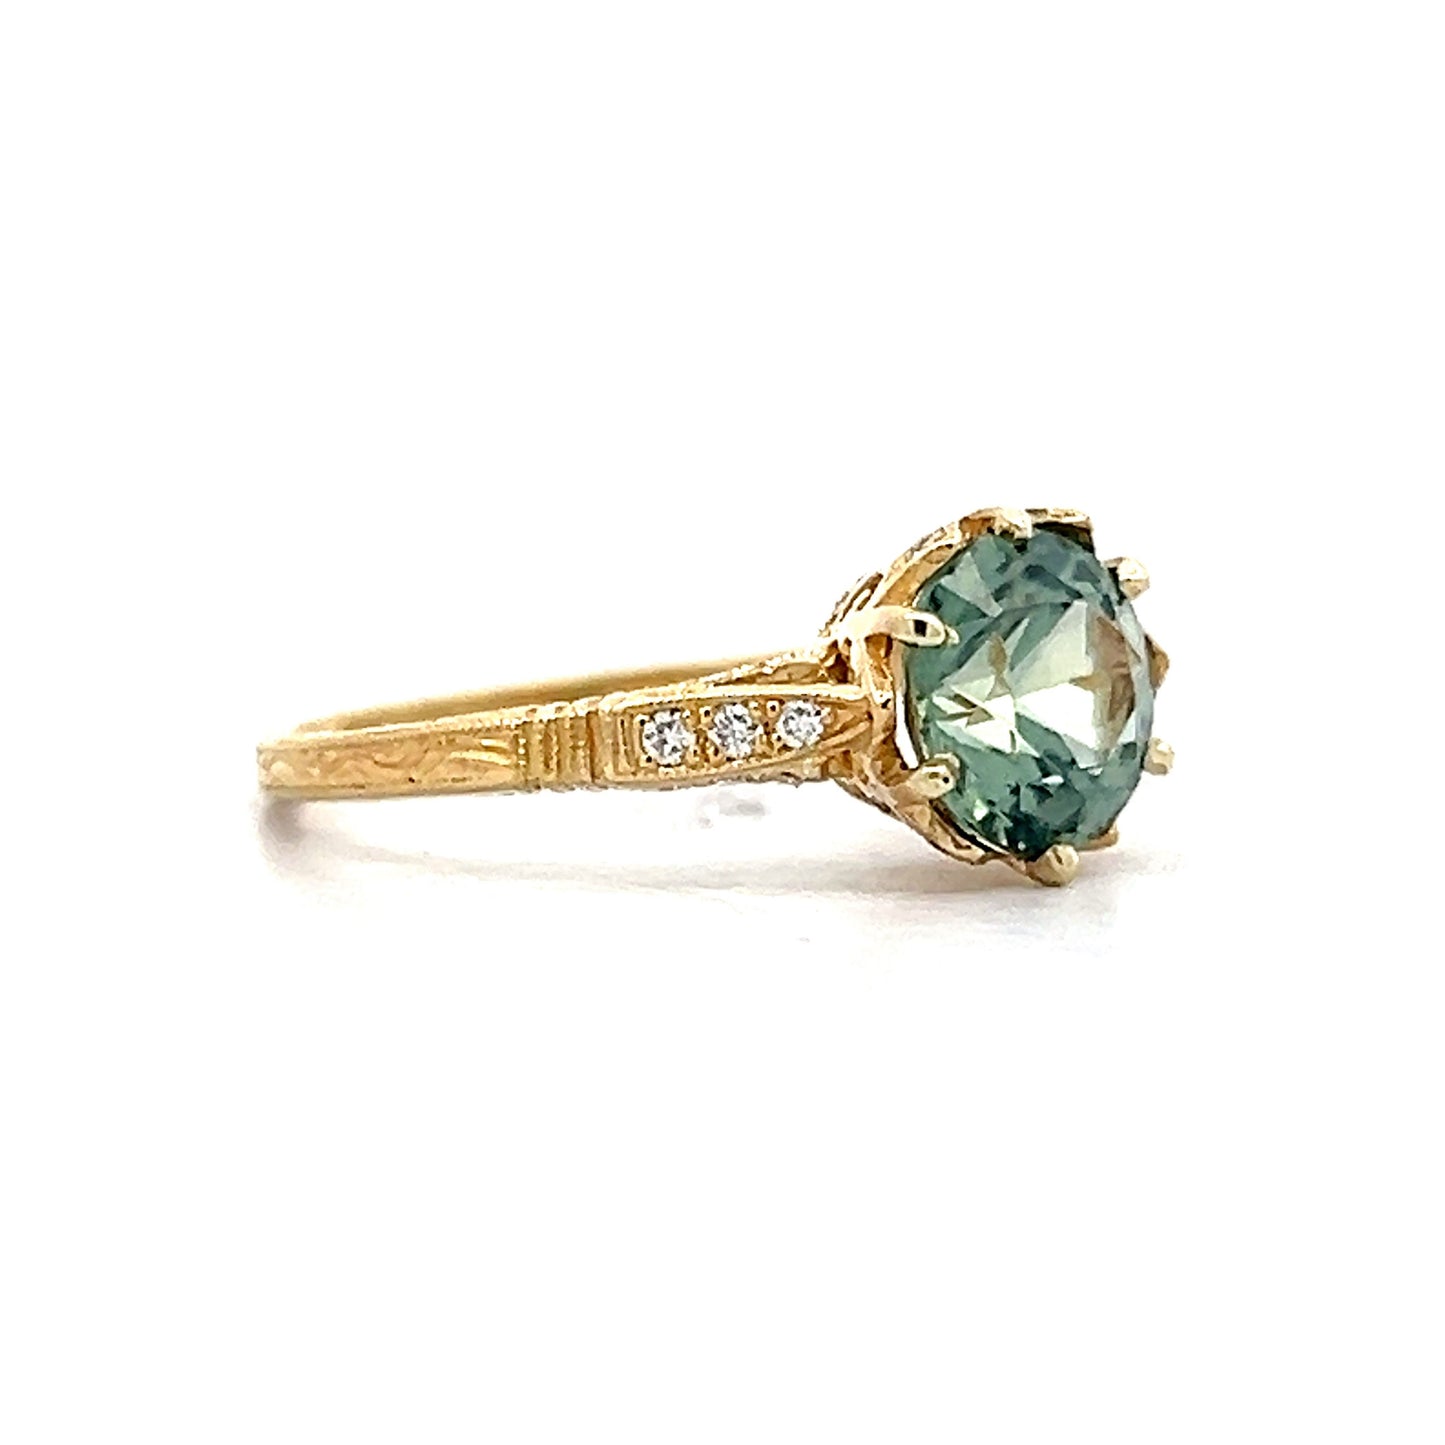 1.77 Teal Montana Sapphire Engagement Ring in 14k Yellow Gold